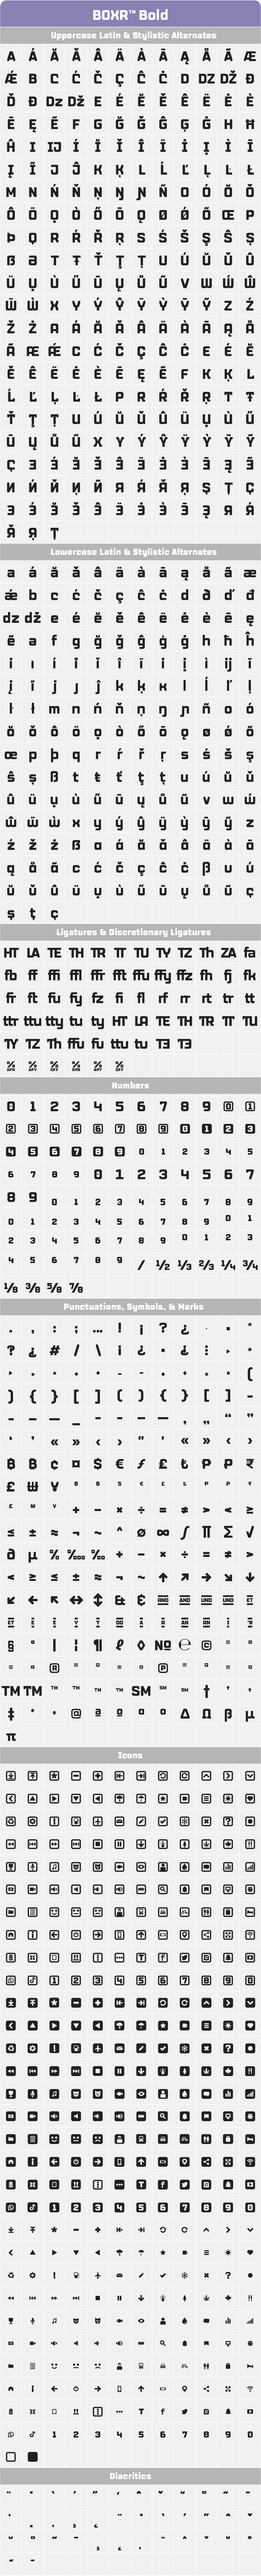 Boxr-Fonts-Bold-Glyph-Tables.png